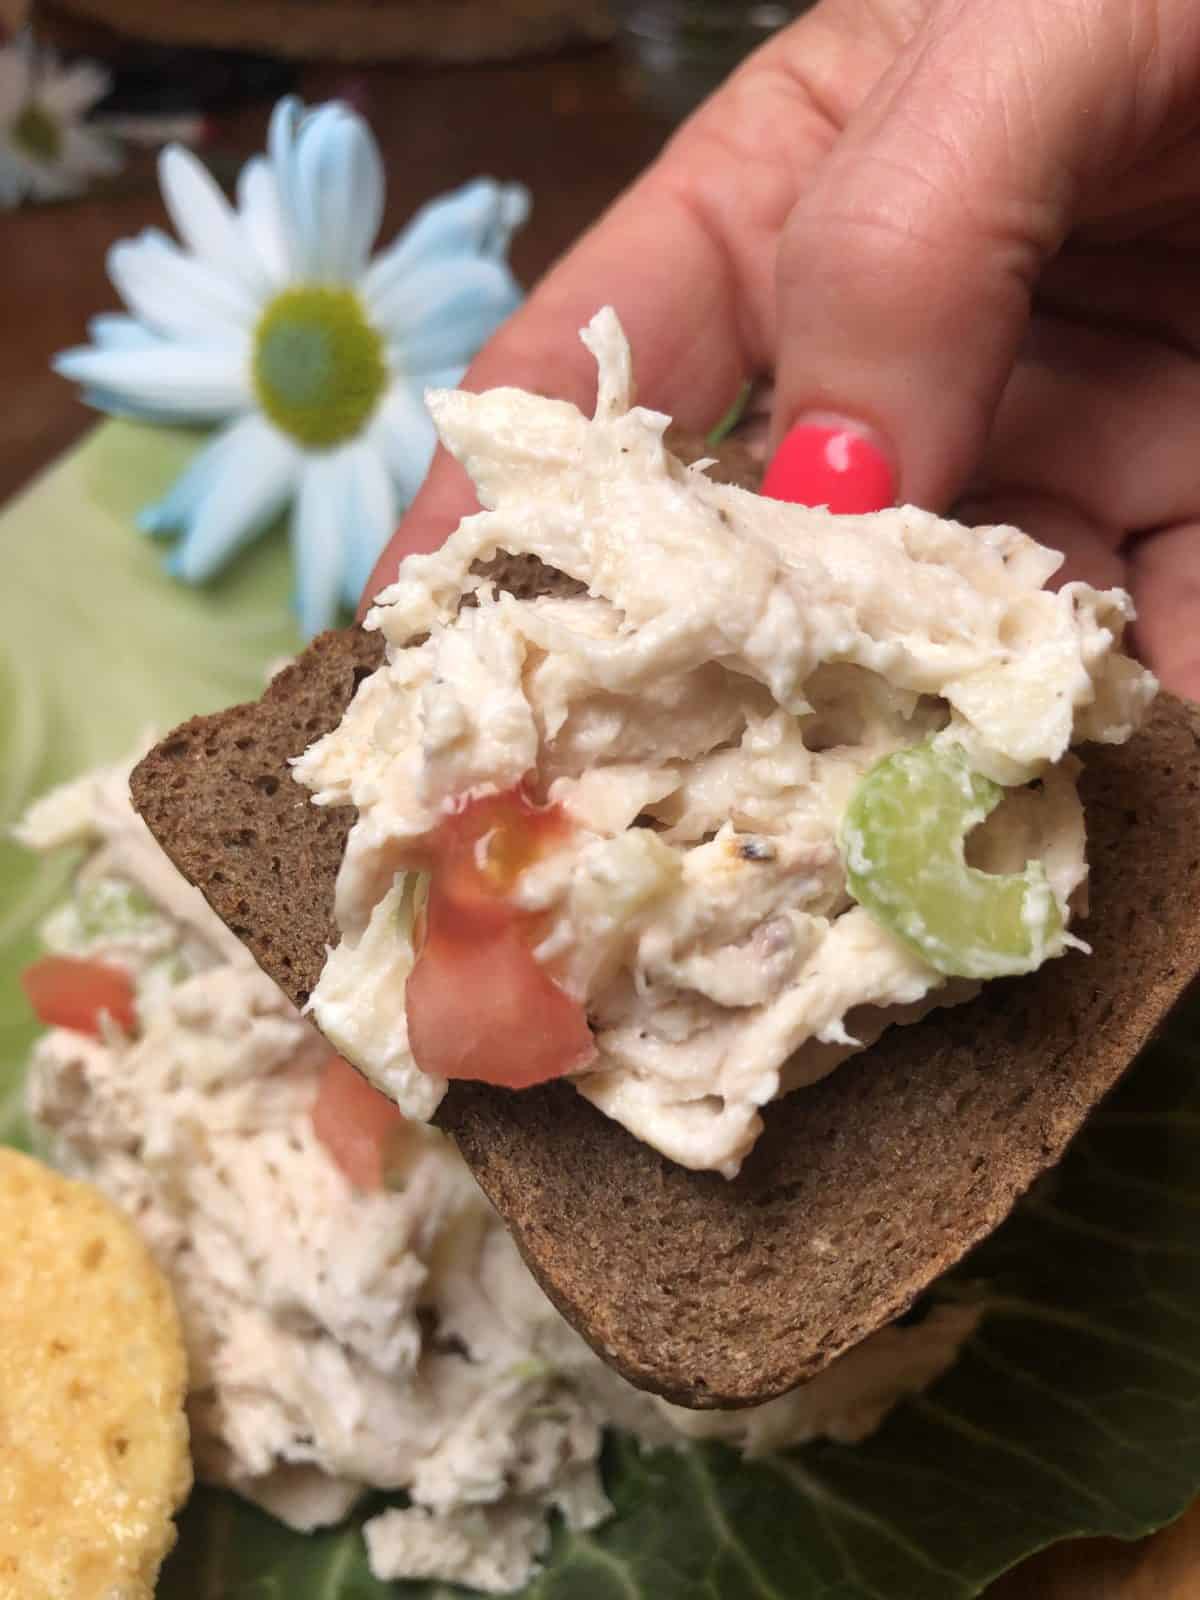 Chicken Salad on Pumpernickel Bread being held by a hand over a plate of homemade rotisserie chicken salad